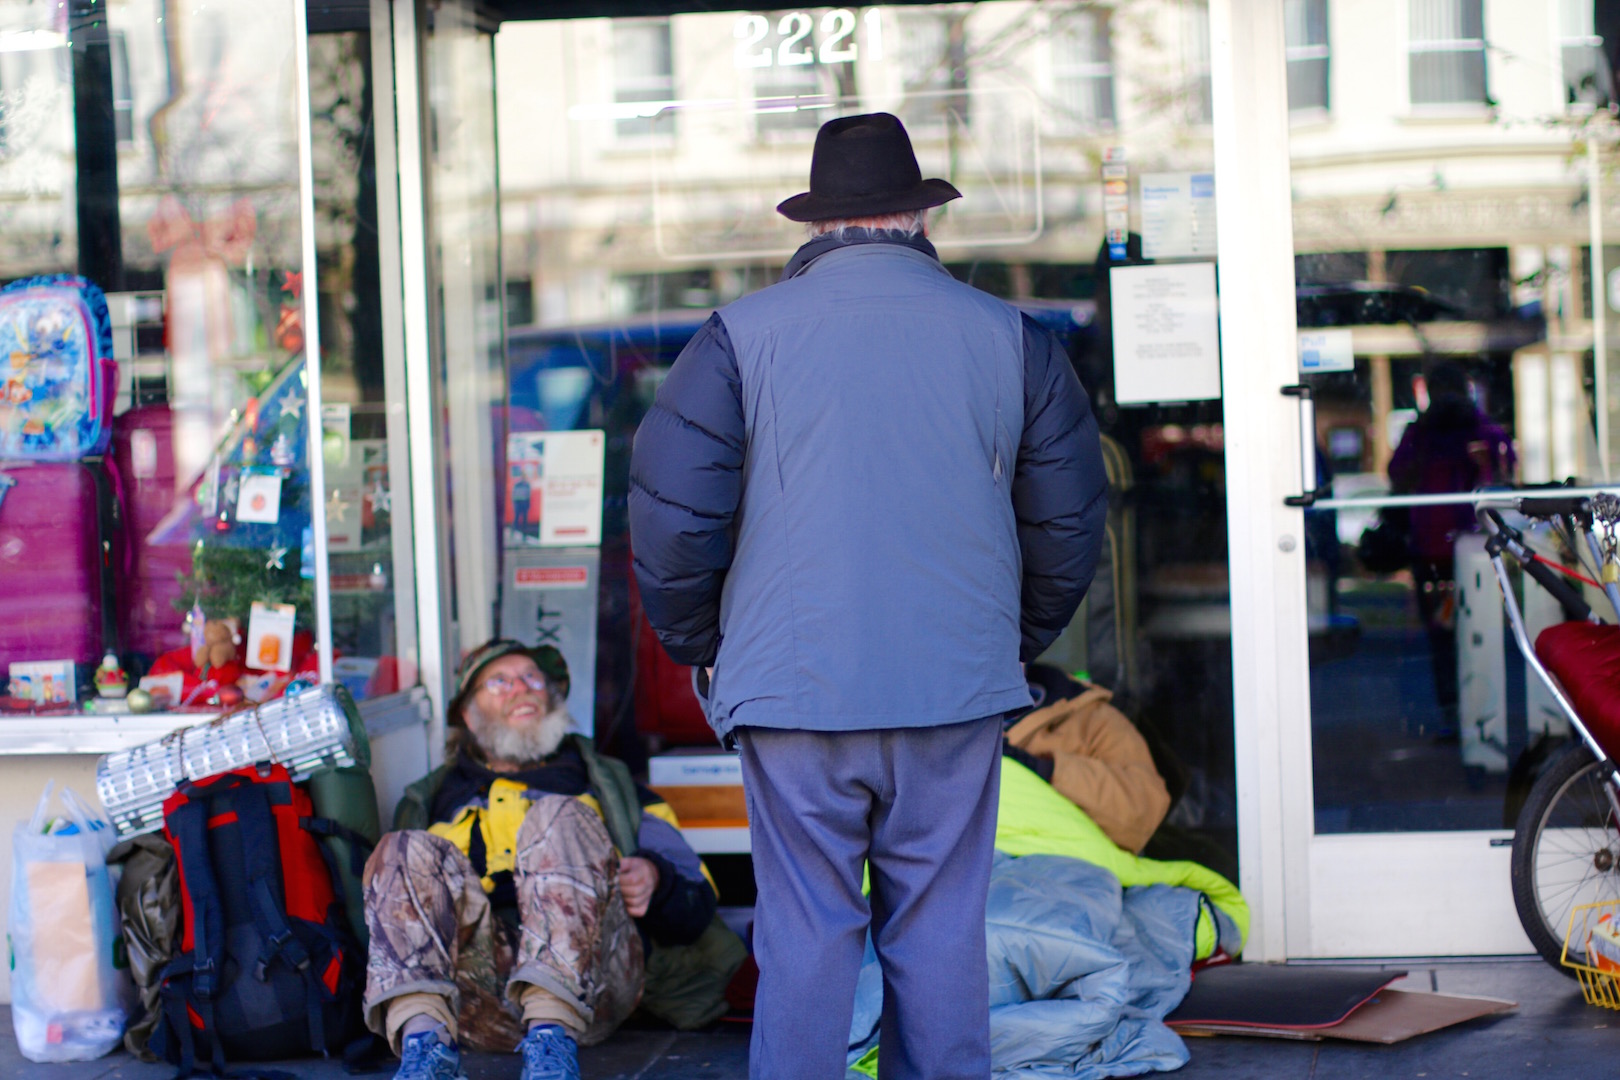 J.C. Orten makes his morning run serving the homeless in downtown Berkeley